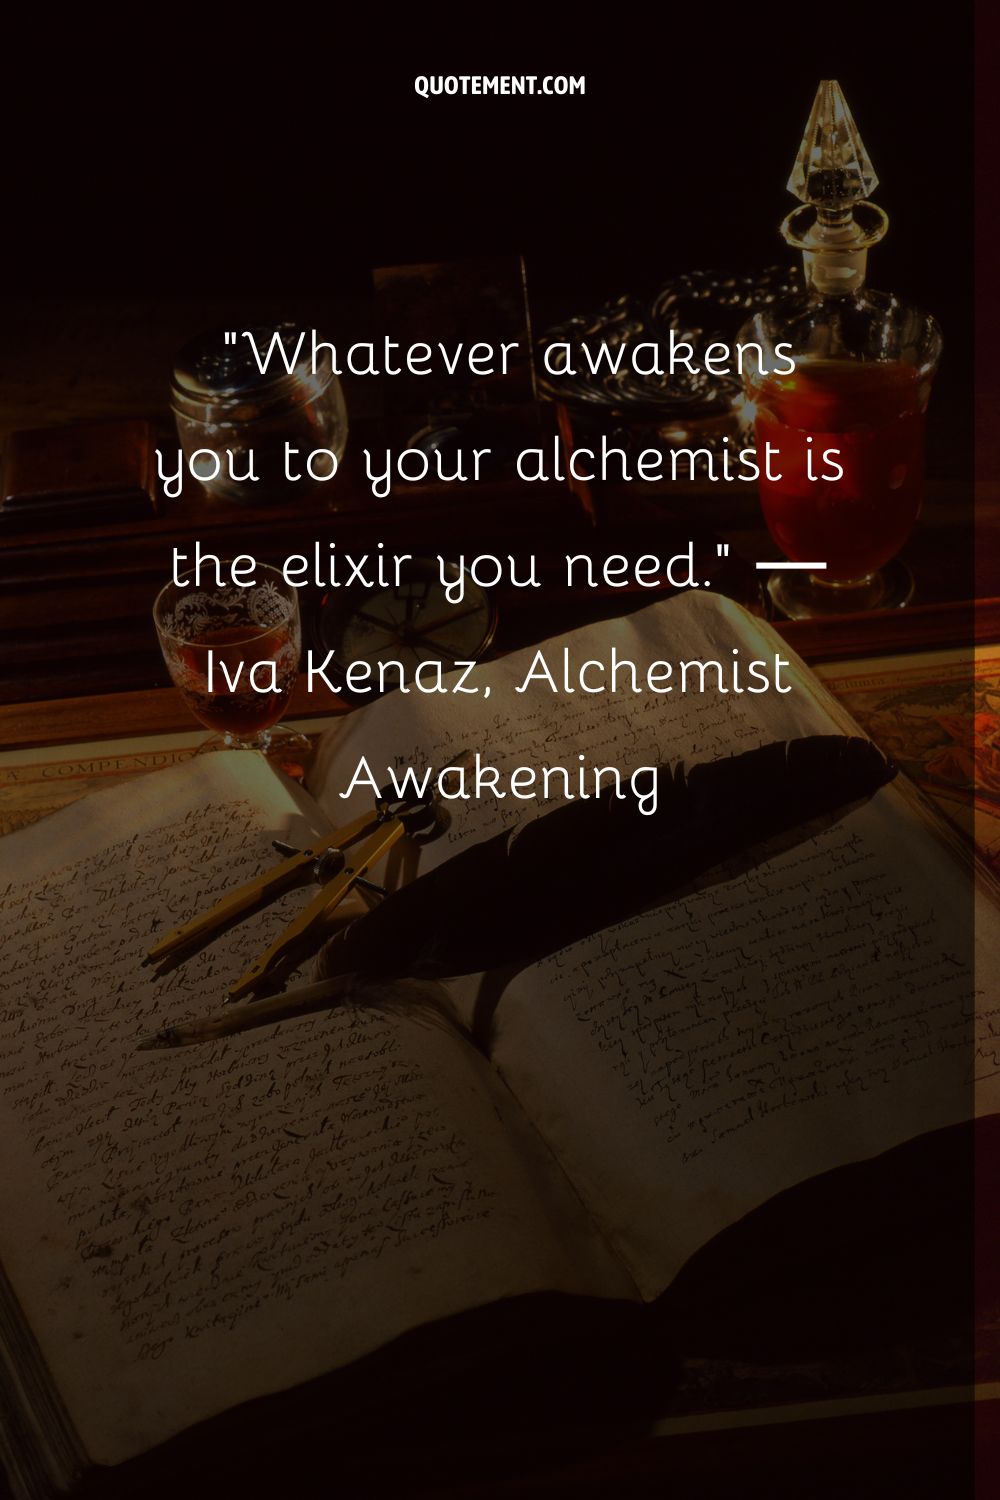 Whatever awakens you to your alchemist is the elixir you need